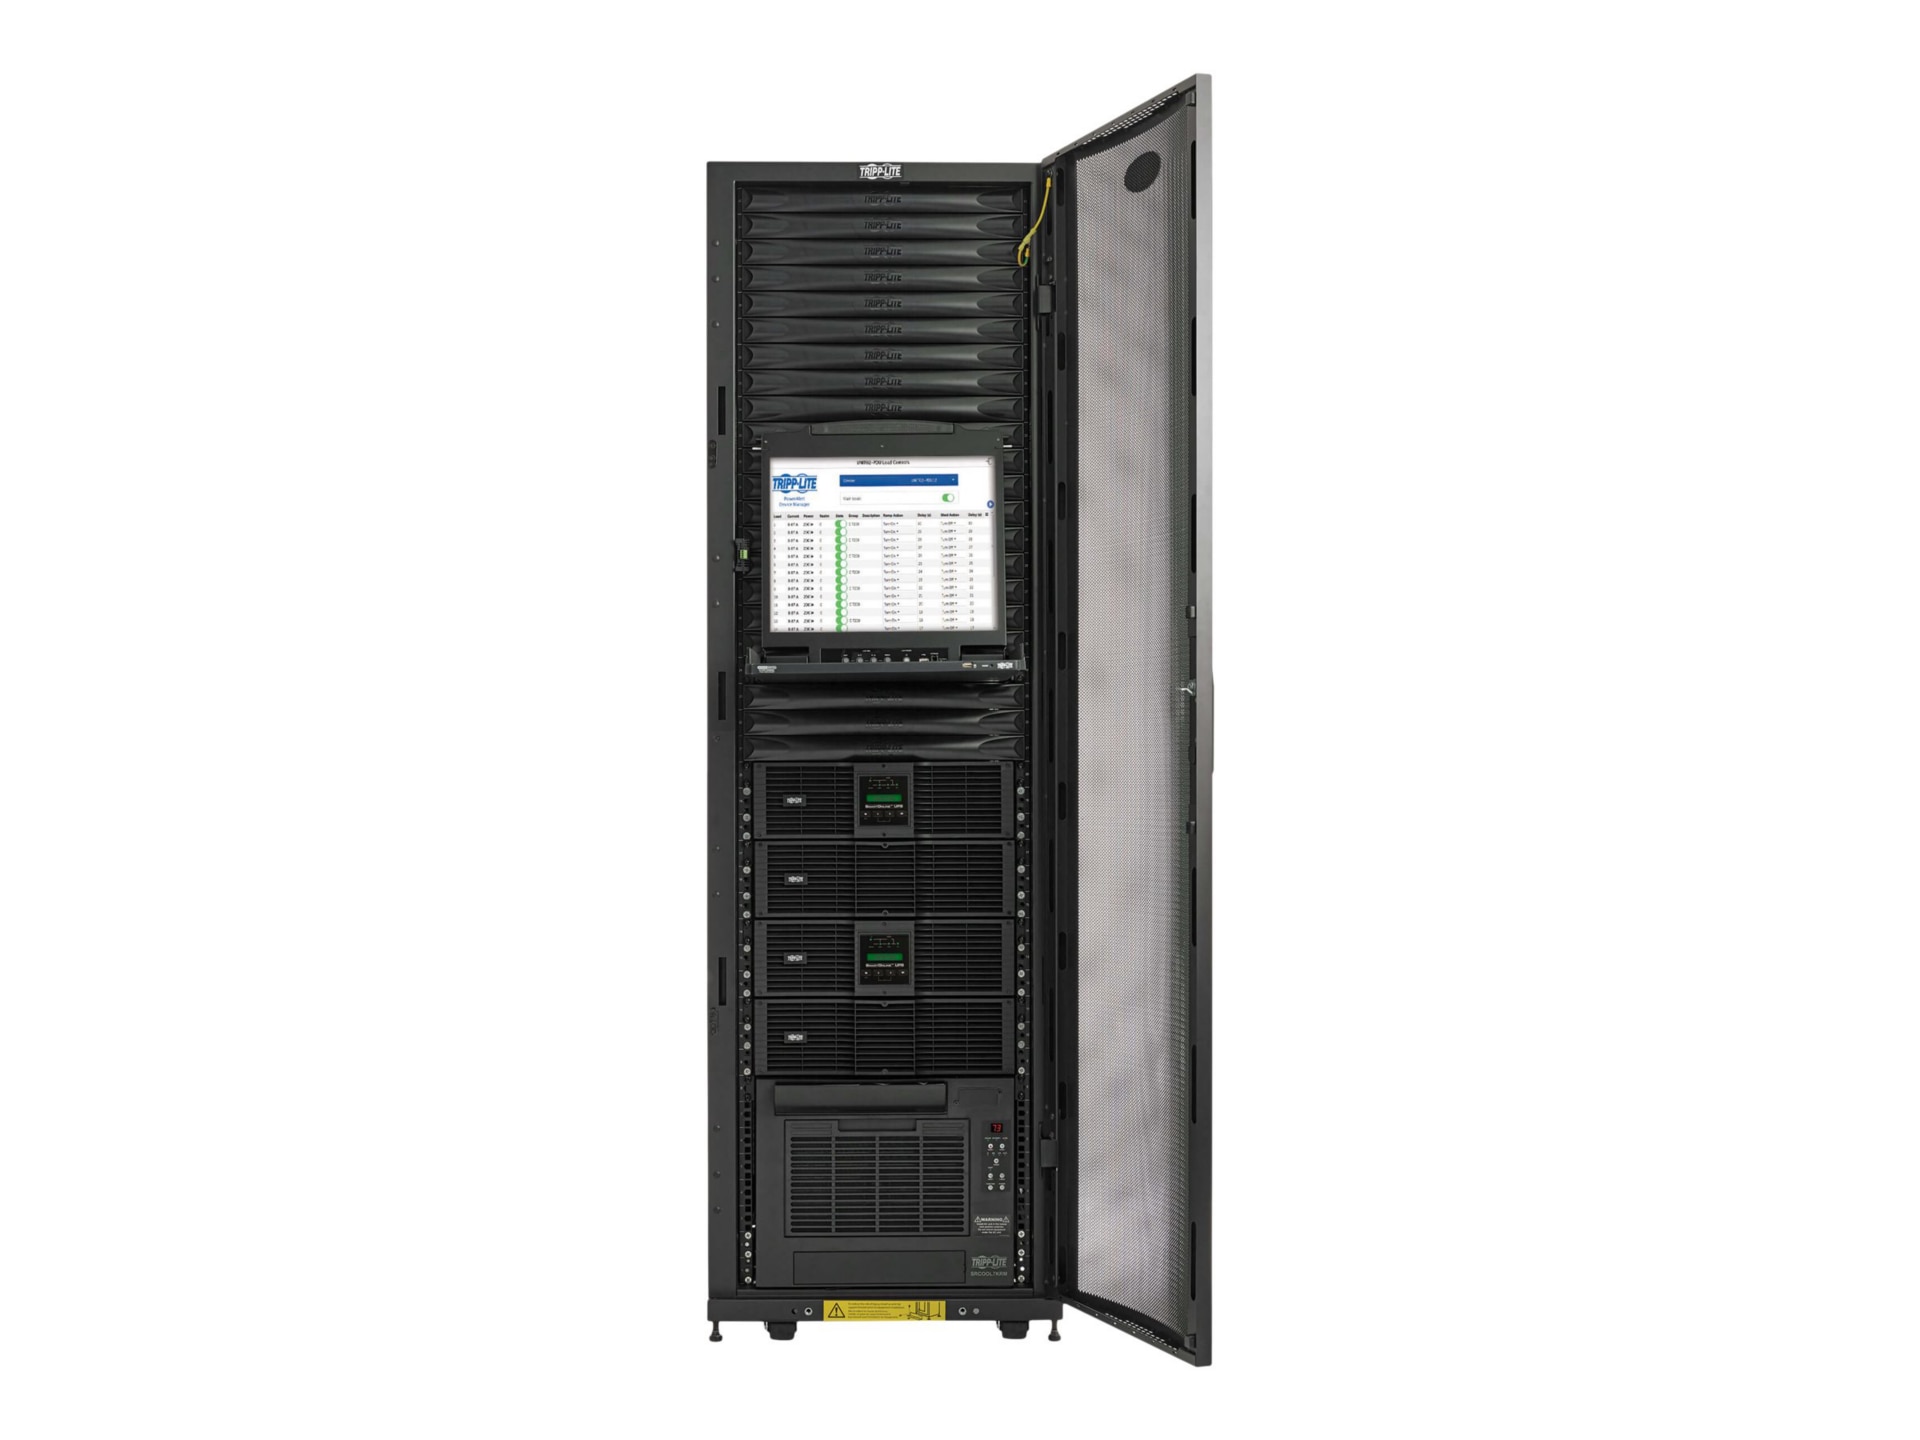 Tripp Lite EdgeReady Micro Data Center - 38U, (2) 3 kVA UPS Systems (N+N), Network Management and Dual PDUs, 120V